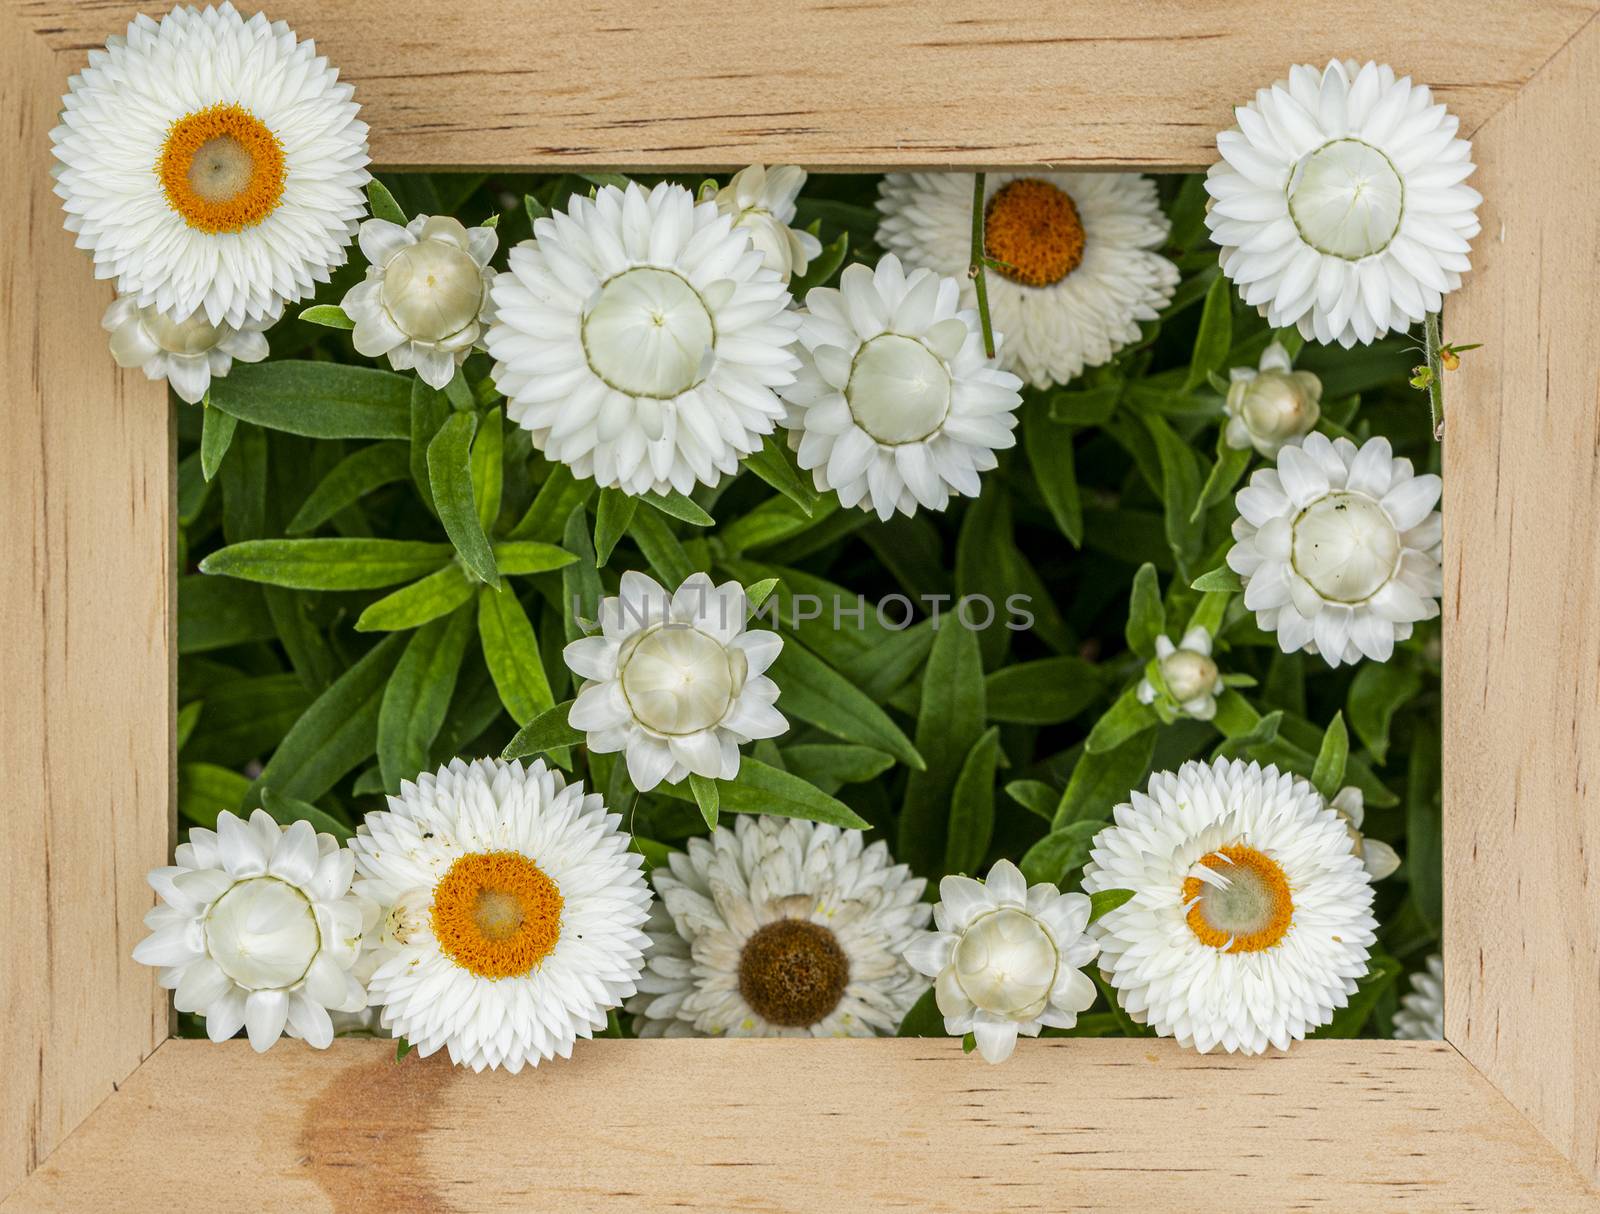 Helichrysum flowers in a wooden frame by ben44